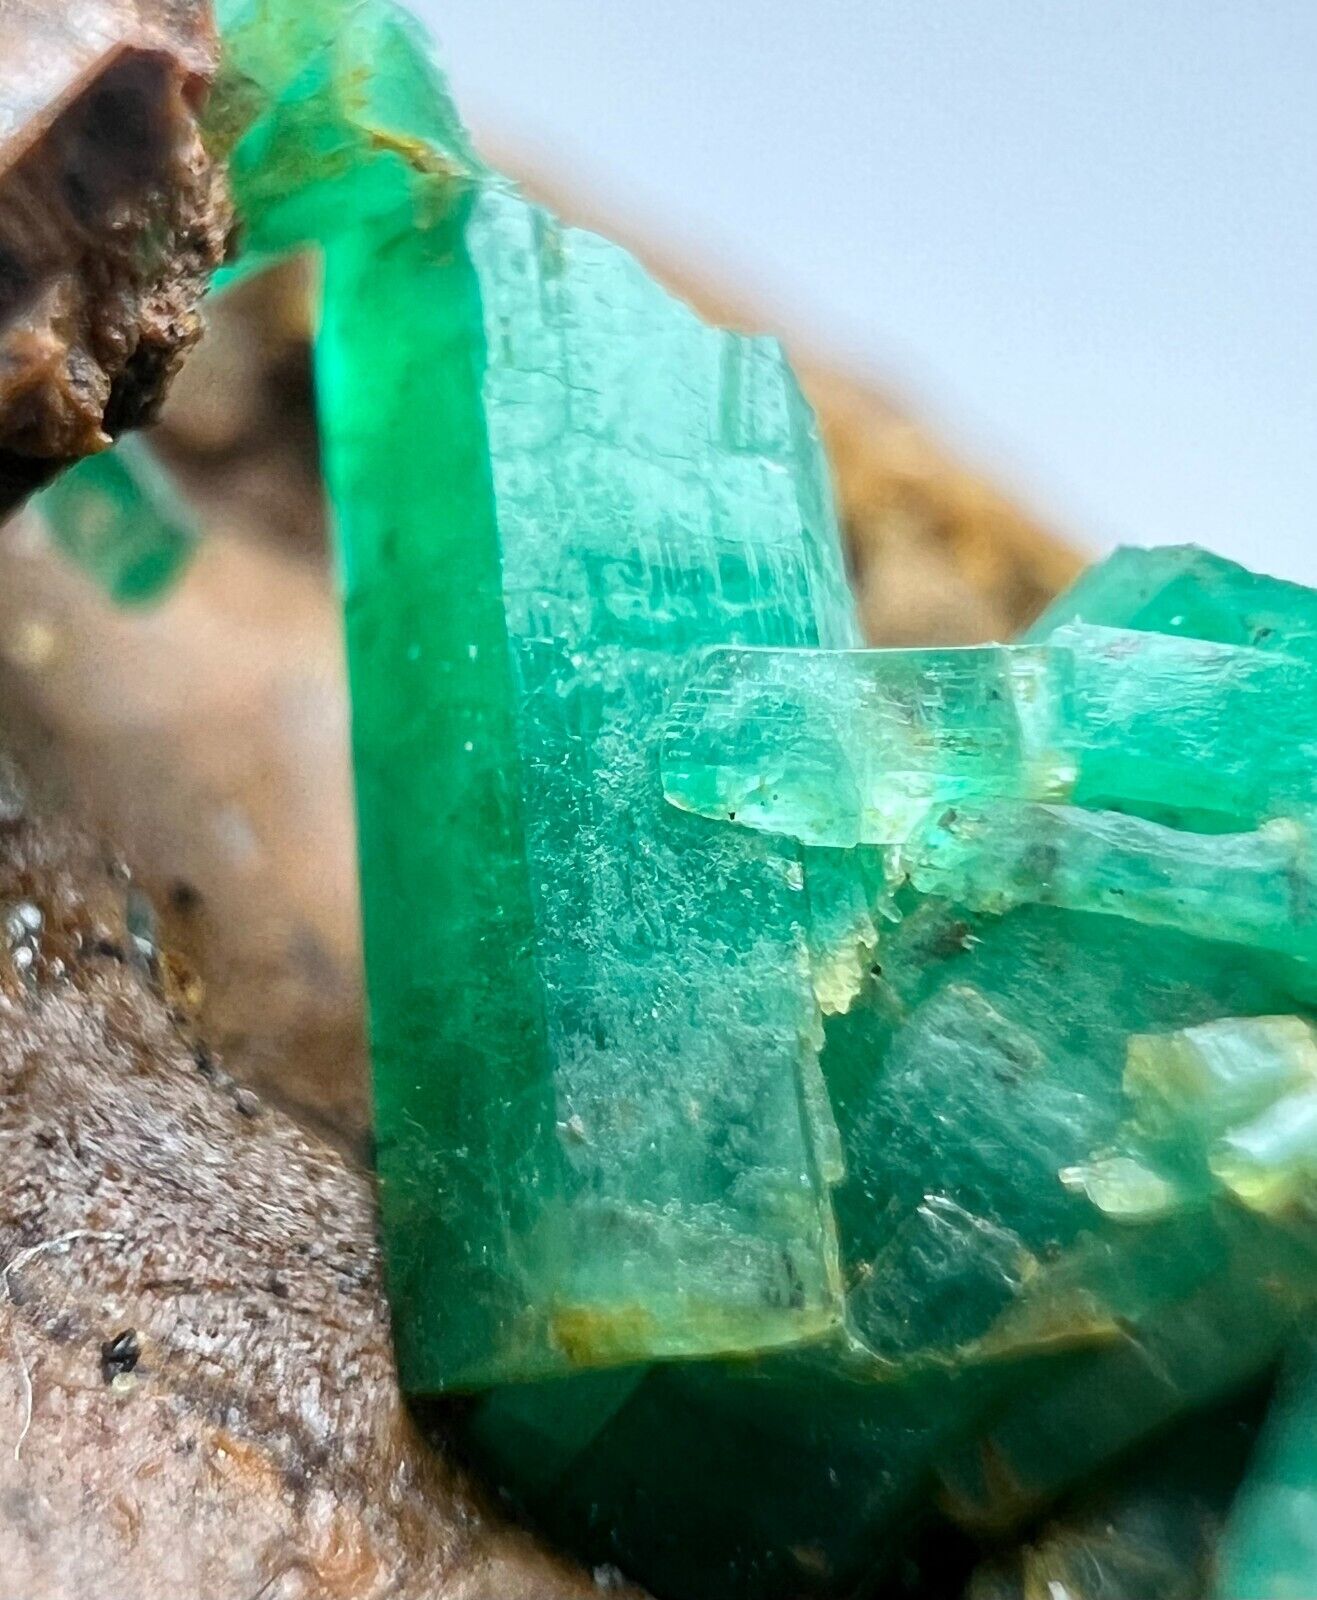 475 CT Well Terminated Panjsher Top Green Emerald Crystals Bunch On Matrix @AFG